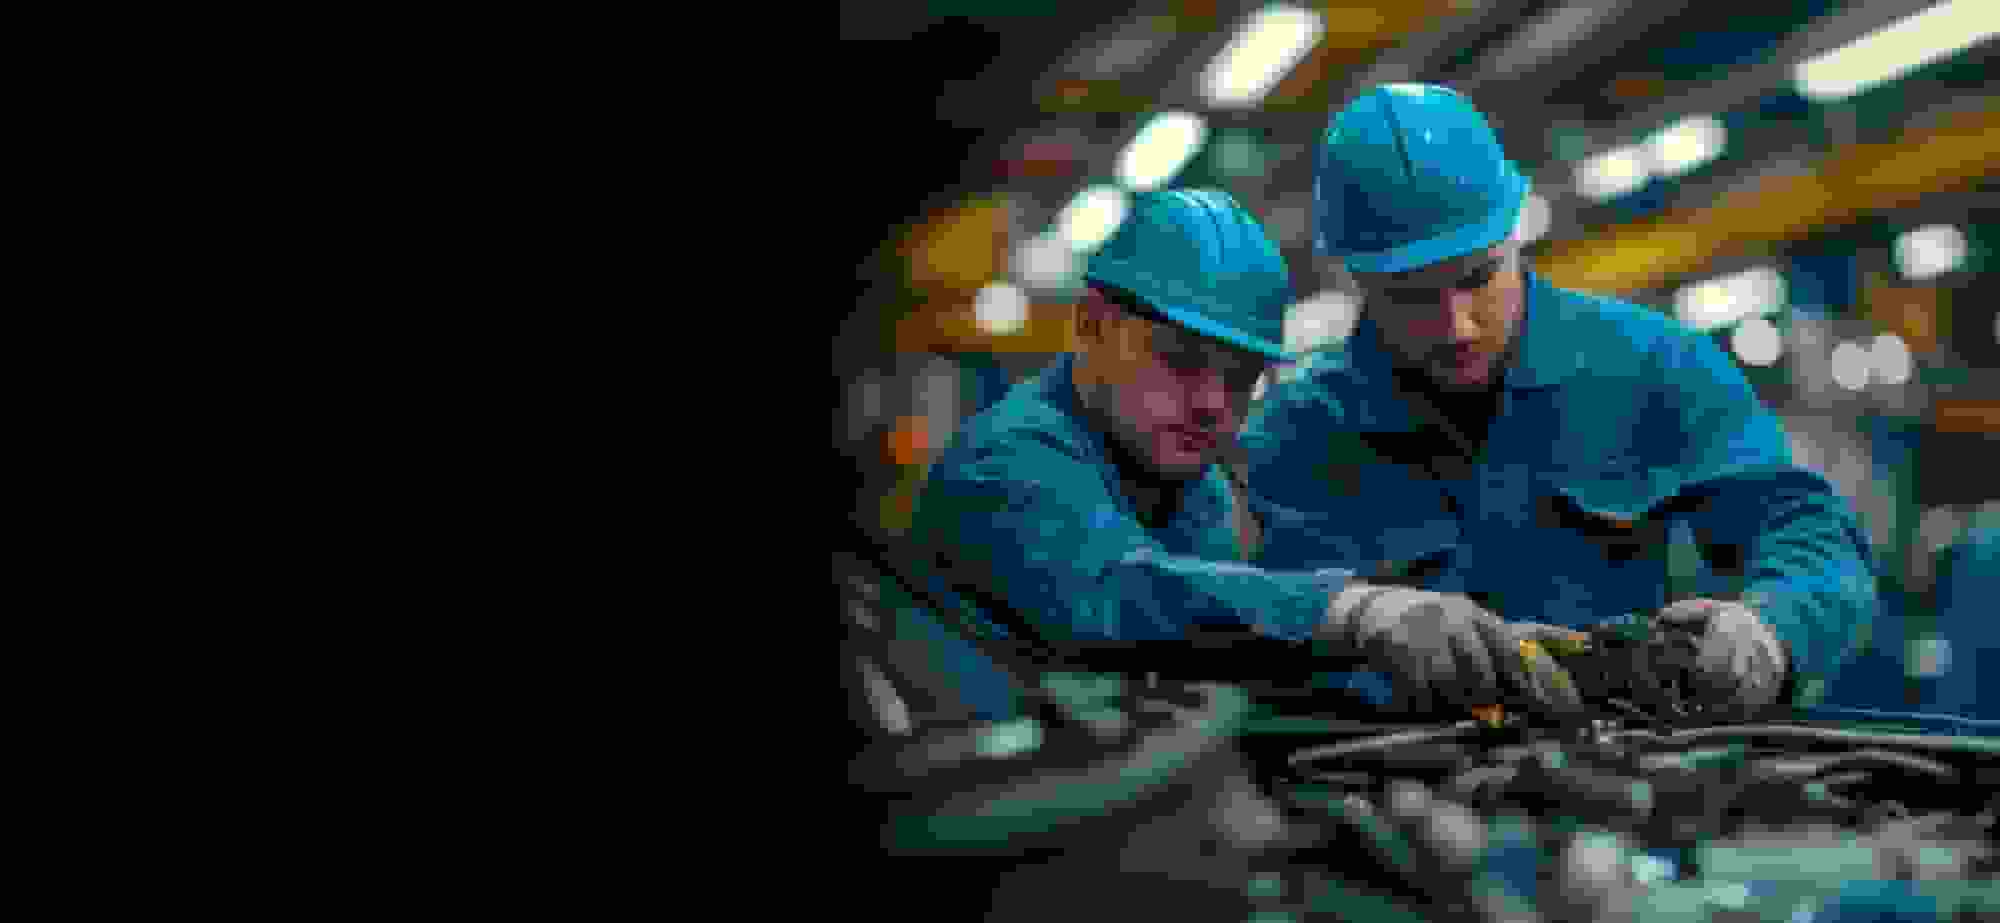 Two people working on a car in a factory.